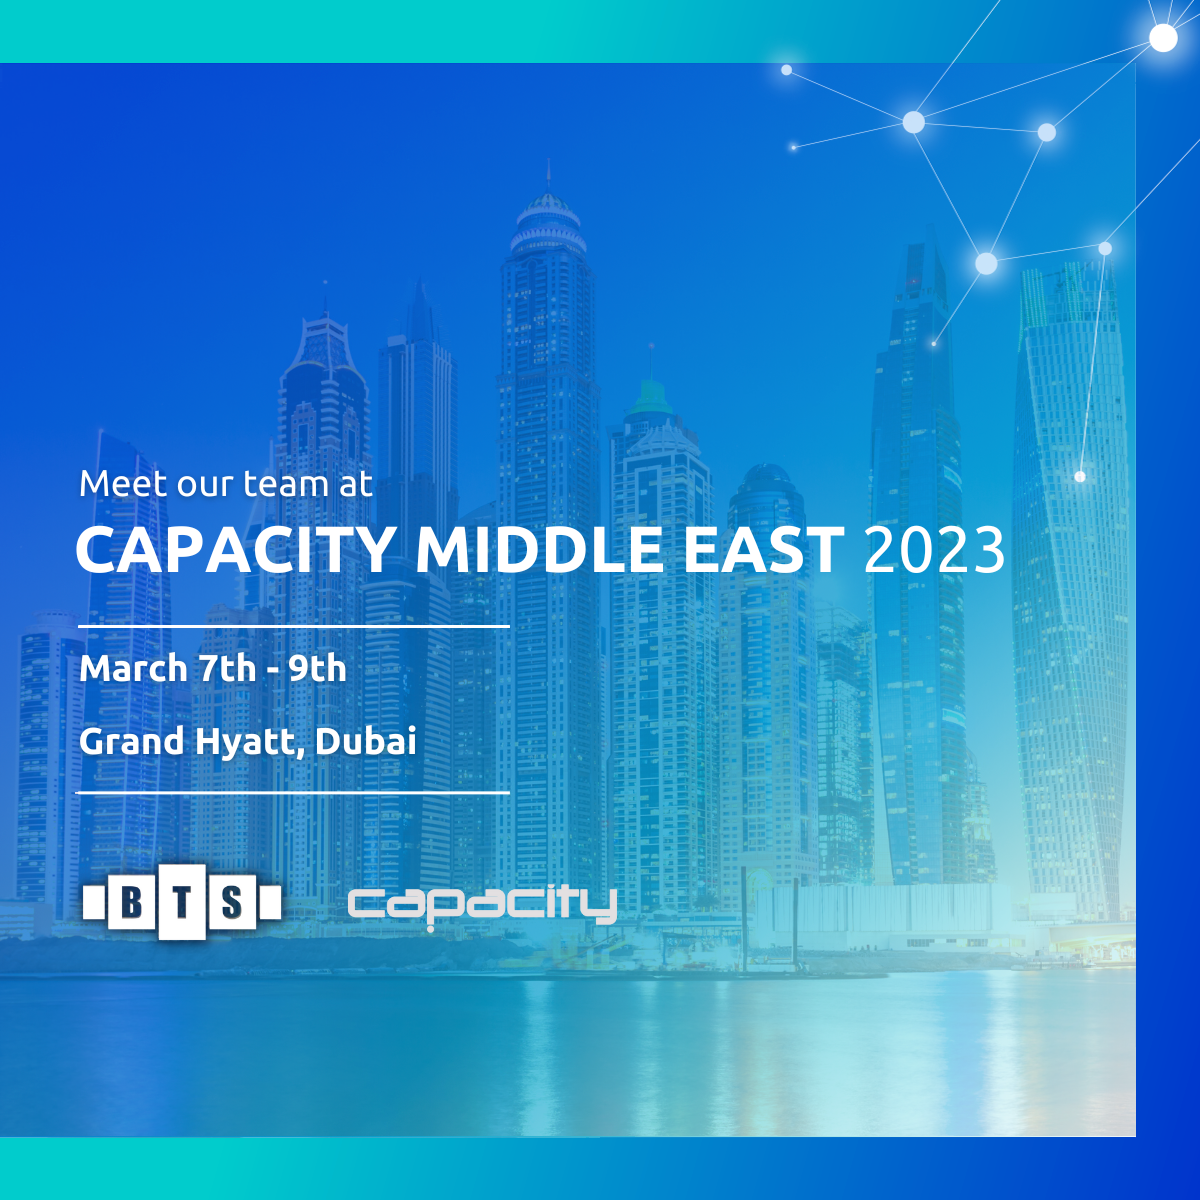 Information about Capacity Middle East 2023